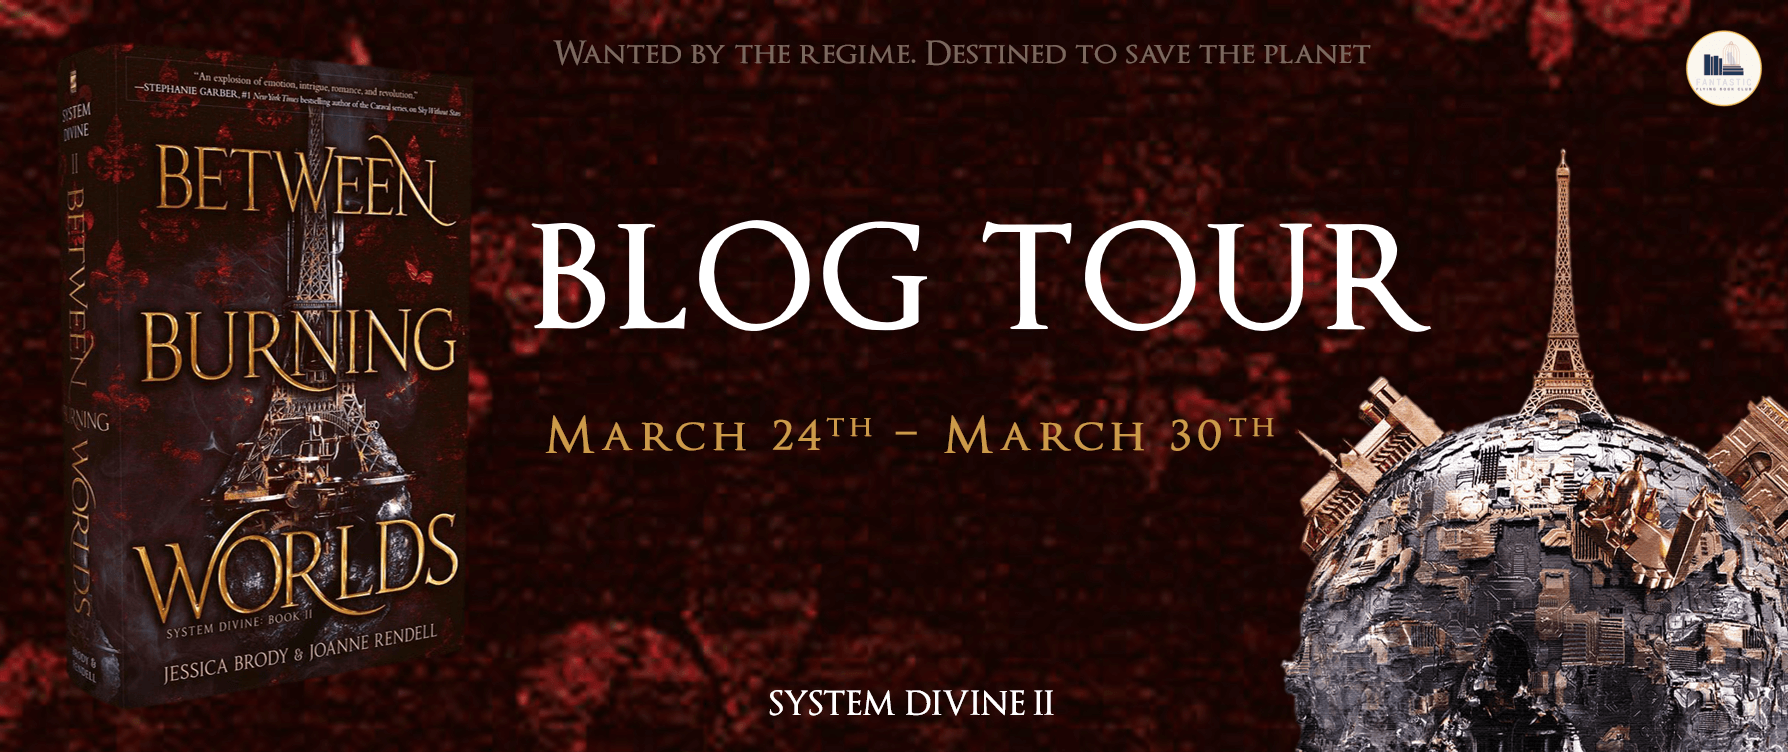 Blog Tour Review:  Between Burning Worlds (System Divine #2) by Jessica Brody and Joanne Rendell